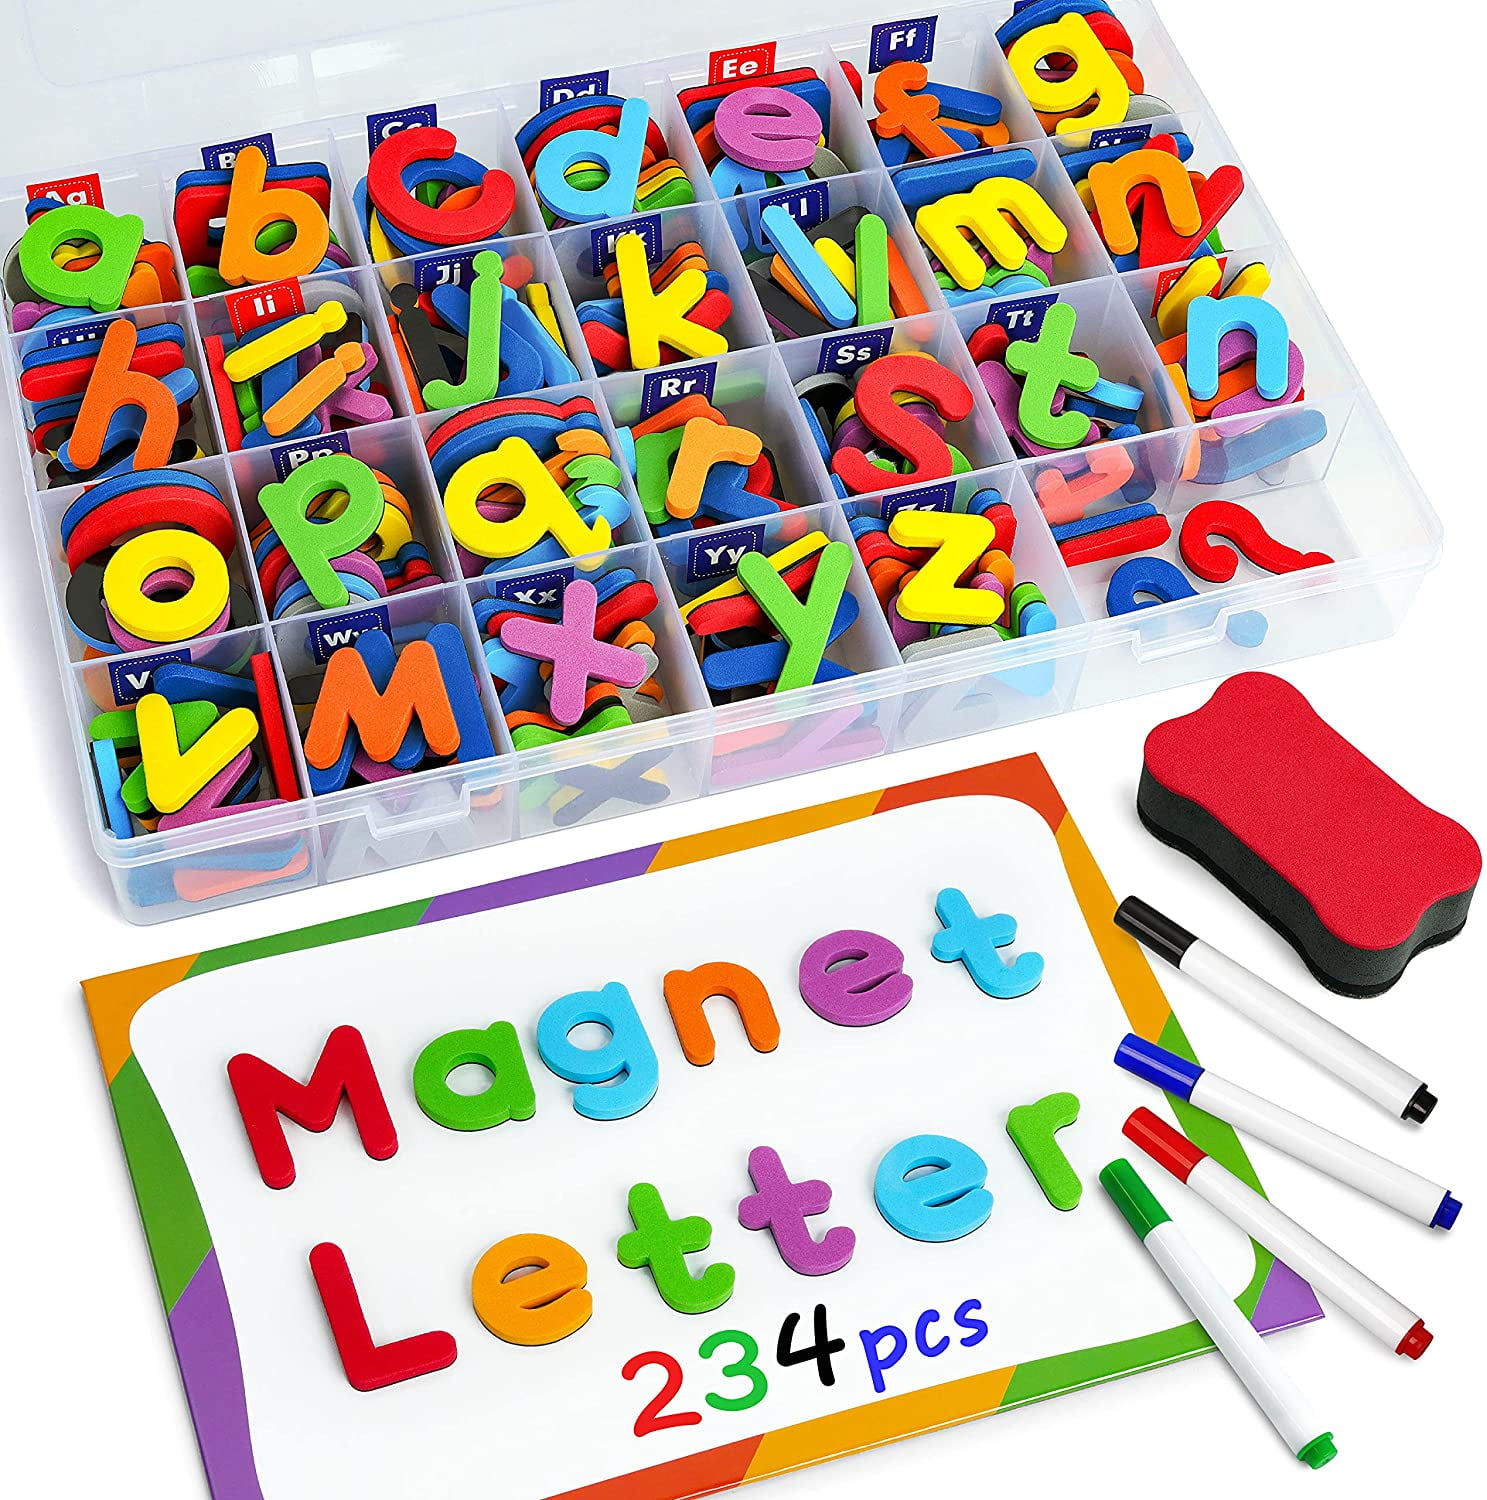 Xinpowwo 238Pcs Magnetic Letters and Numbers for Educating Kids in Fun with Storage Box-Uppercase Lowercase Foam Alphabet ABC Magnets for Fridge Refrigerator Learning & Spelling Games